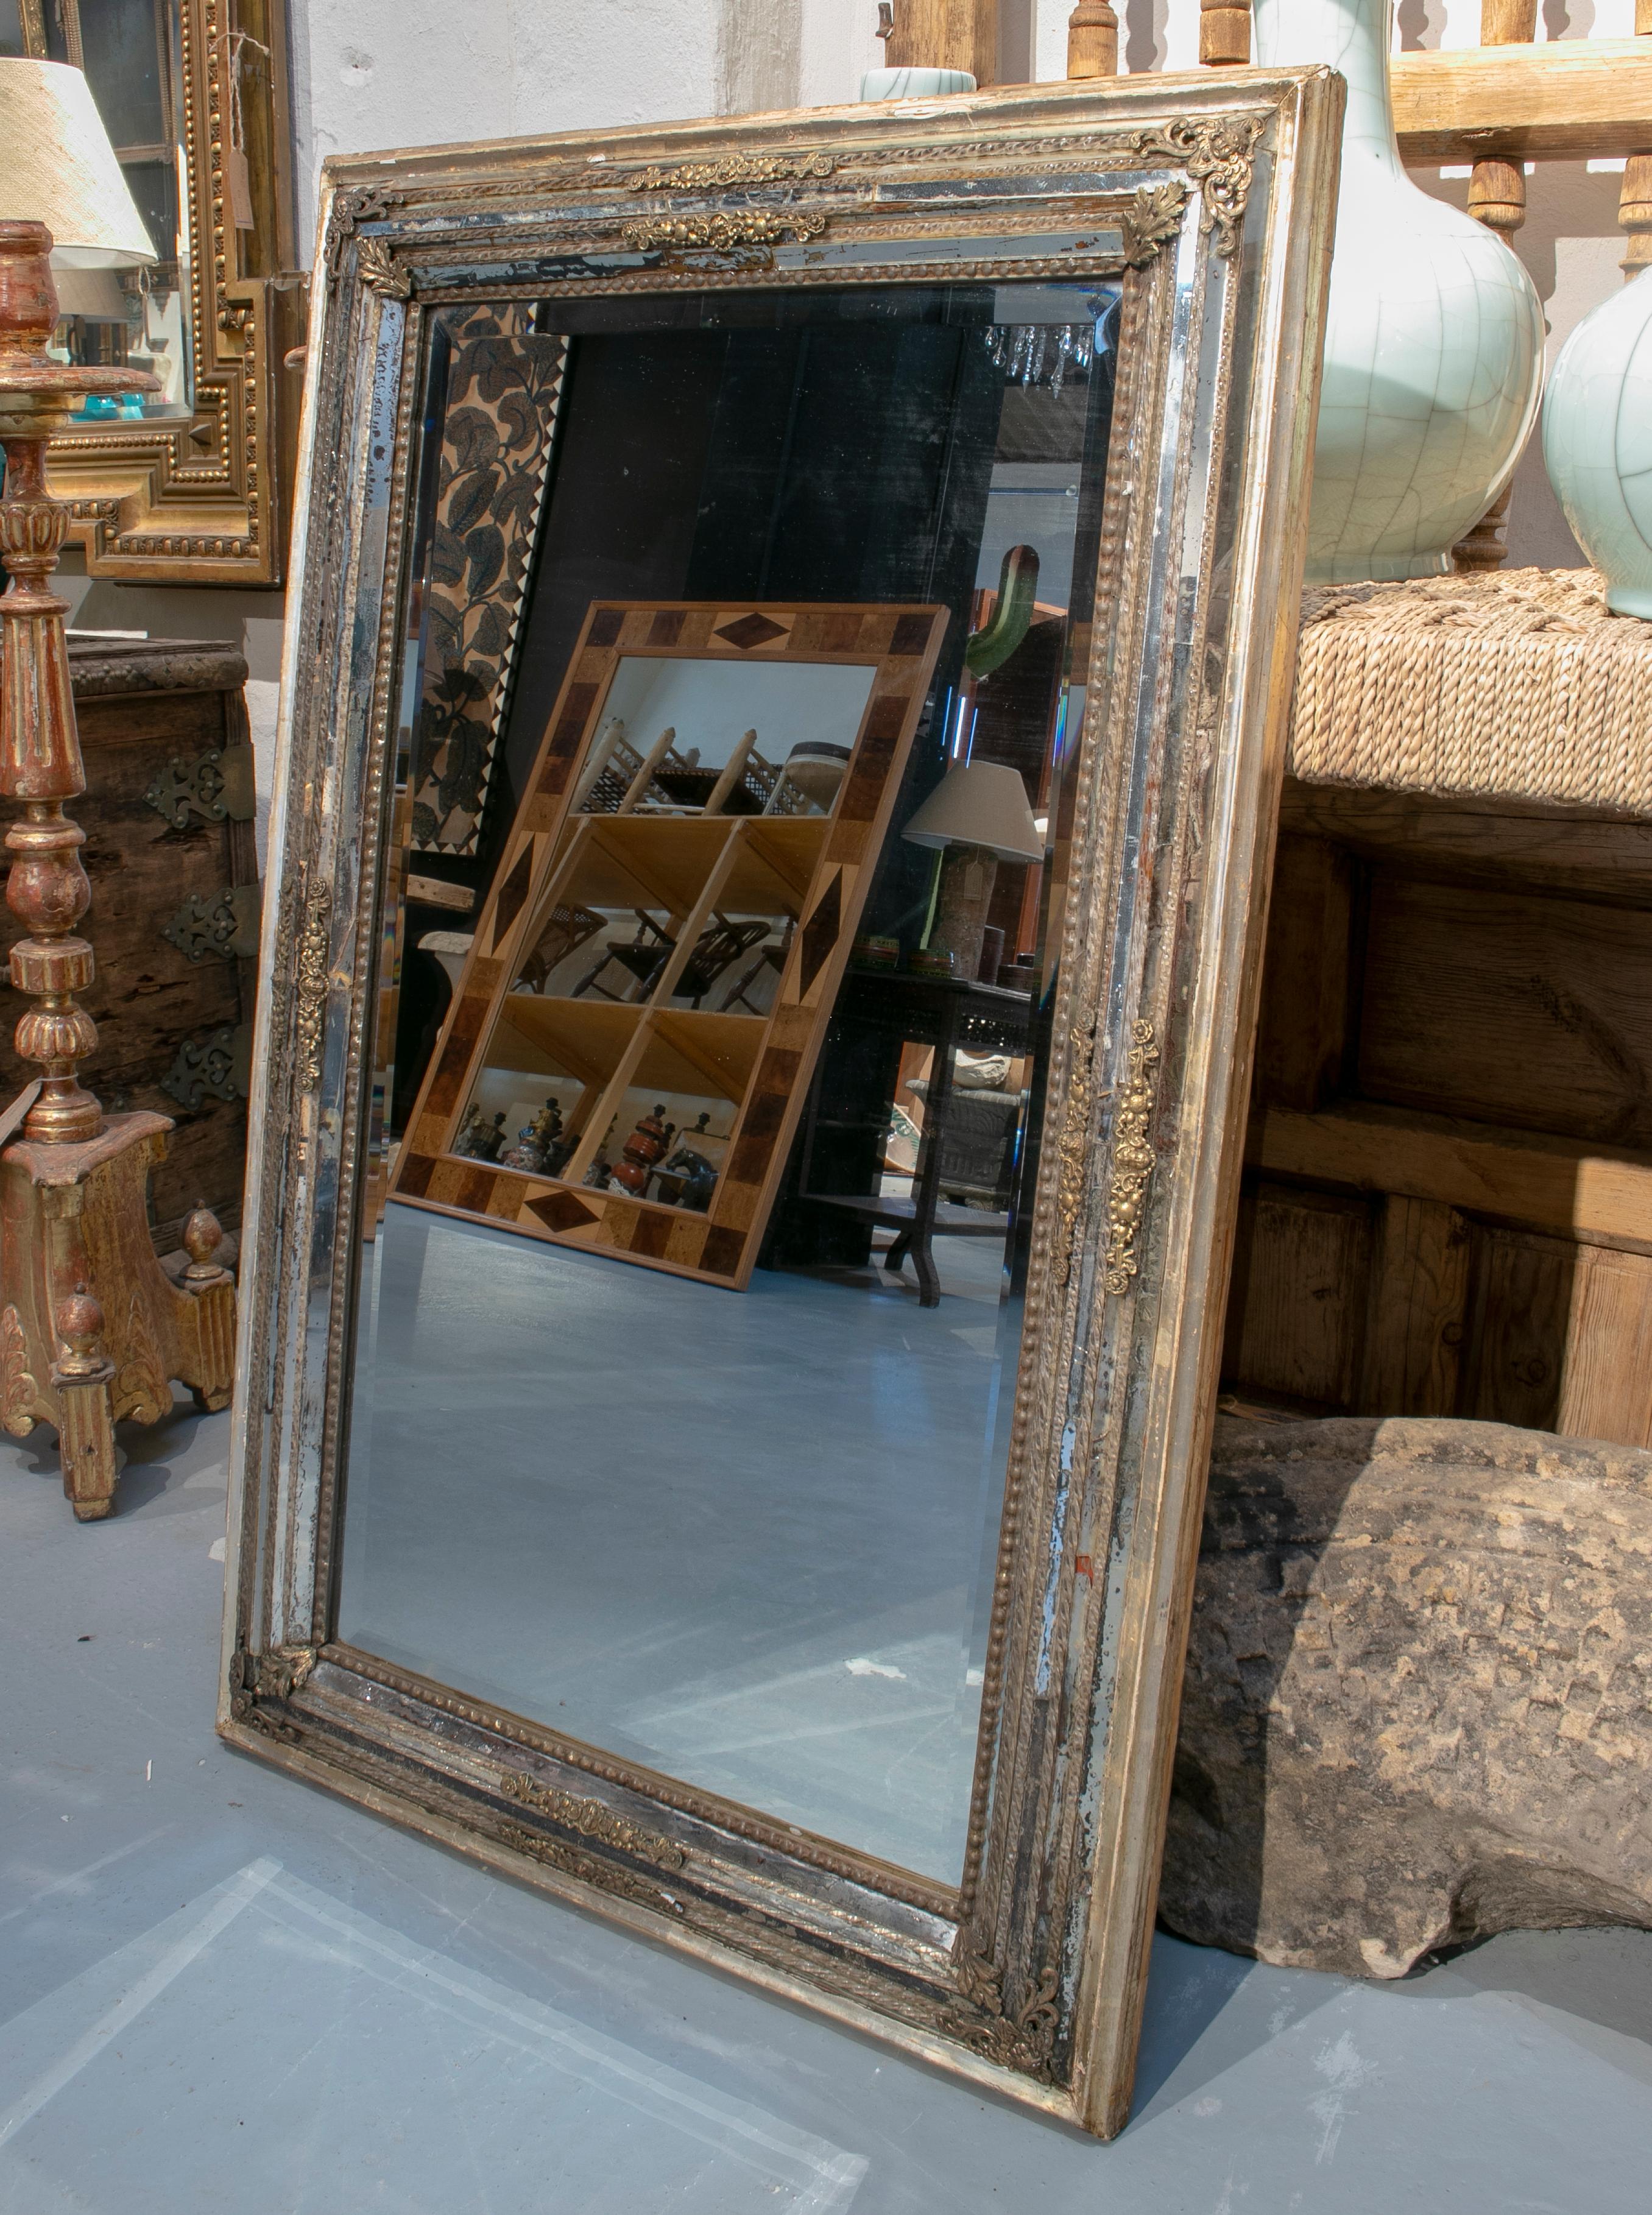 1950s Italian Venetian mirror with glass studded frame and bronze decorations.